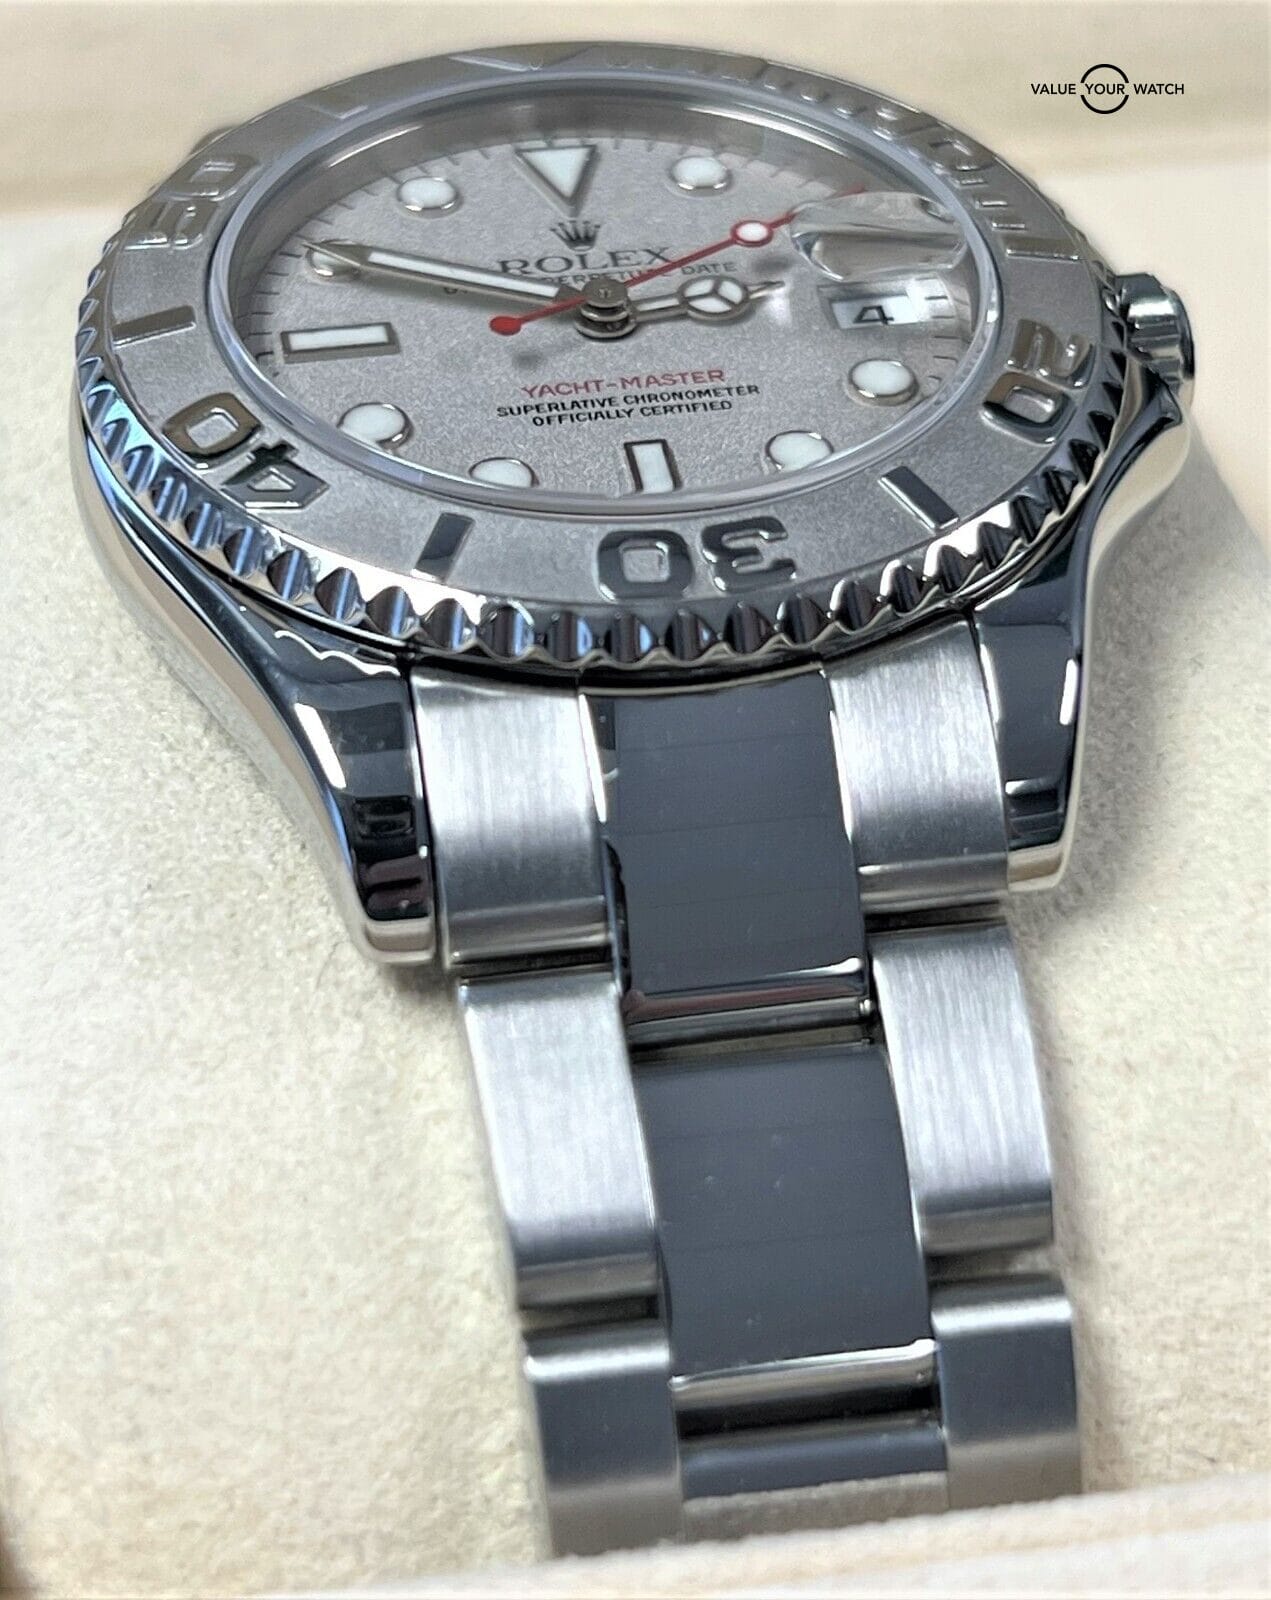 Stainless steel and platinum Rolex Yachtmaster 35mm midsize